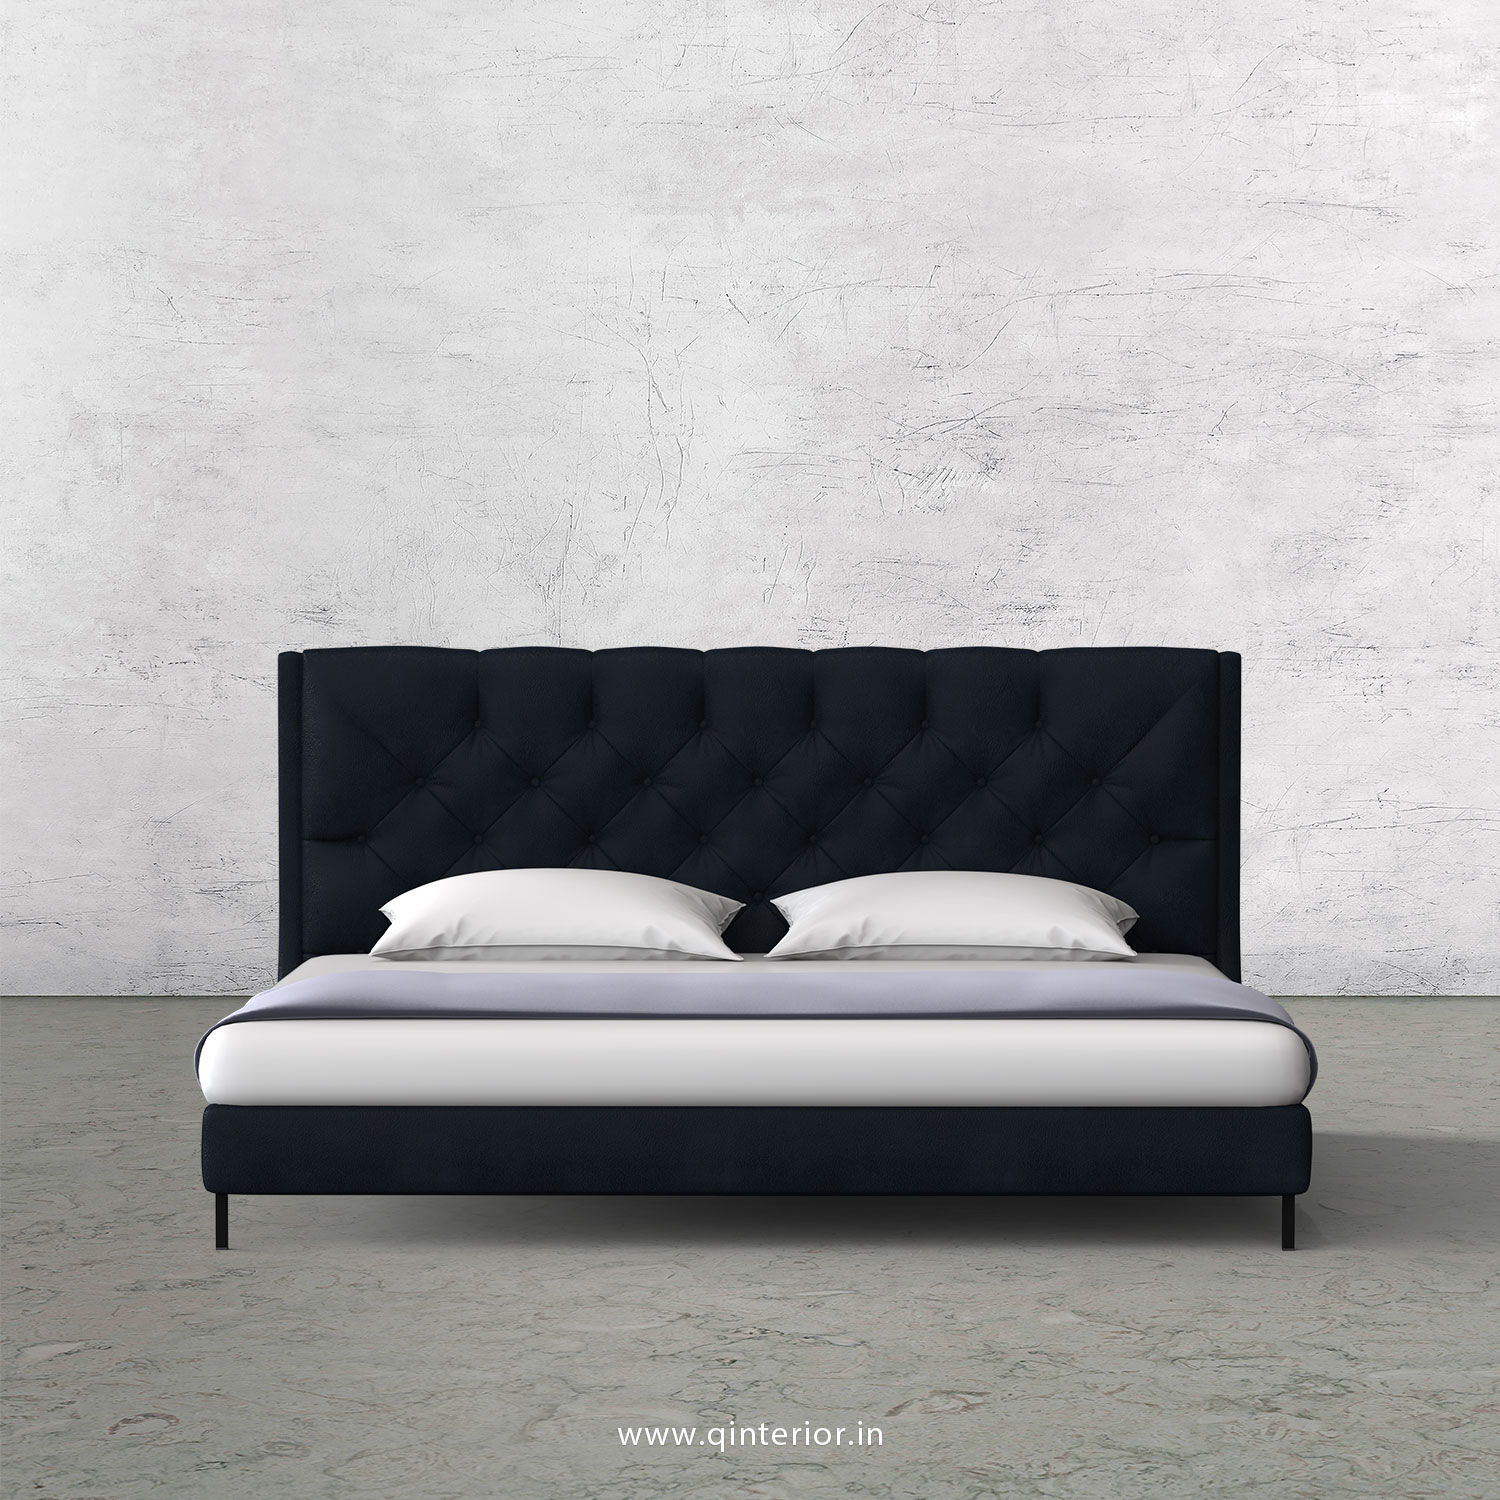 Scorpius King Size Bed in Fab Leather Fabric - KBD003 FL05